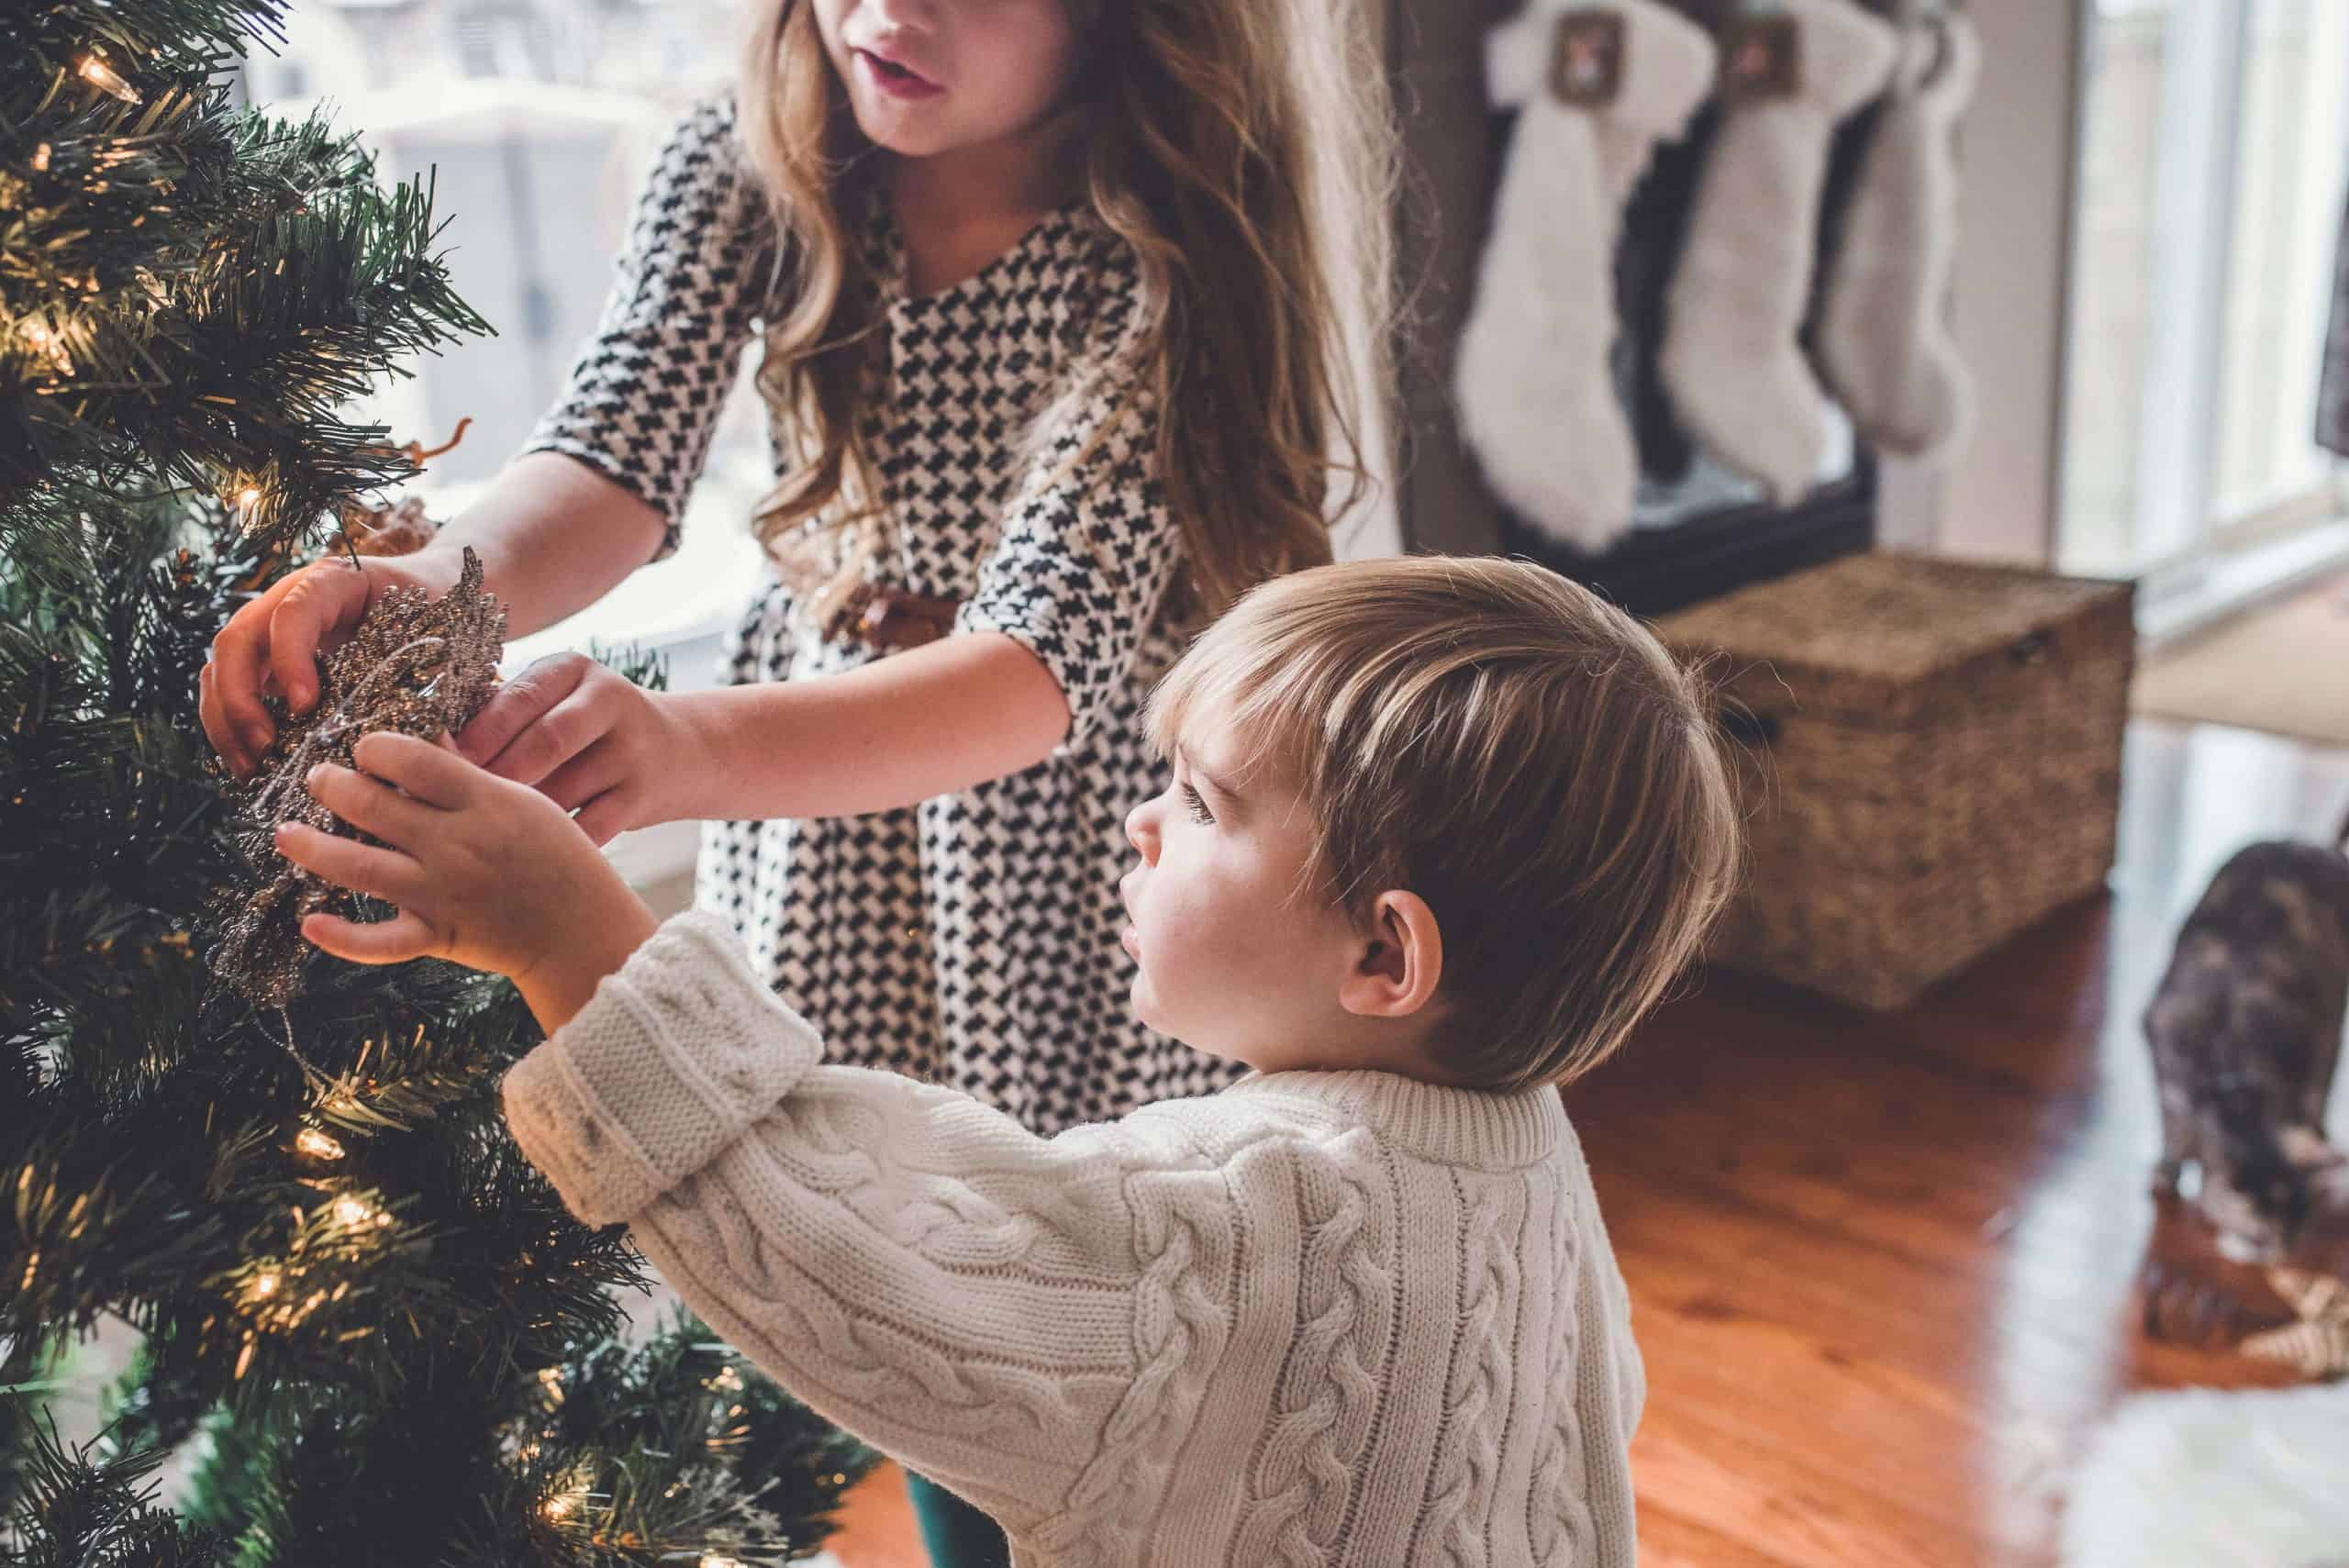 children making memories at christmas by decorating the tree together